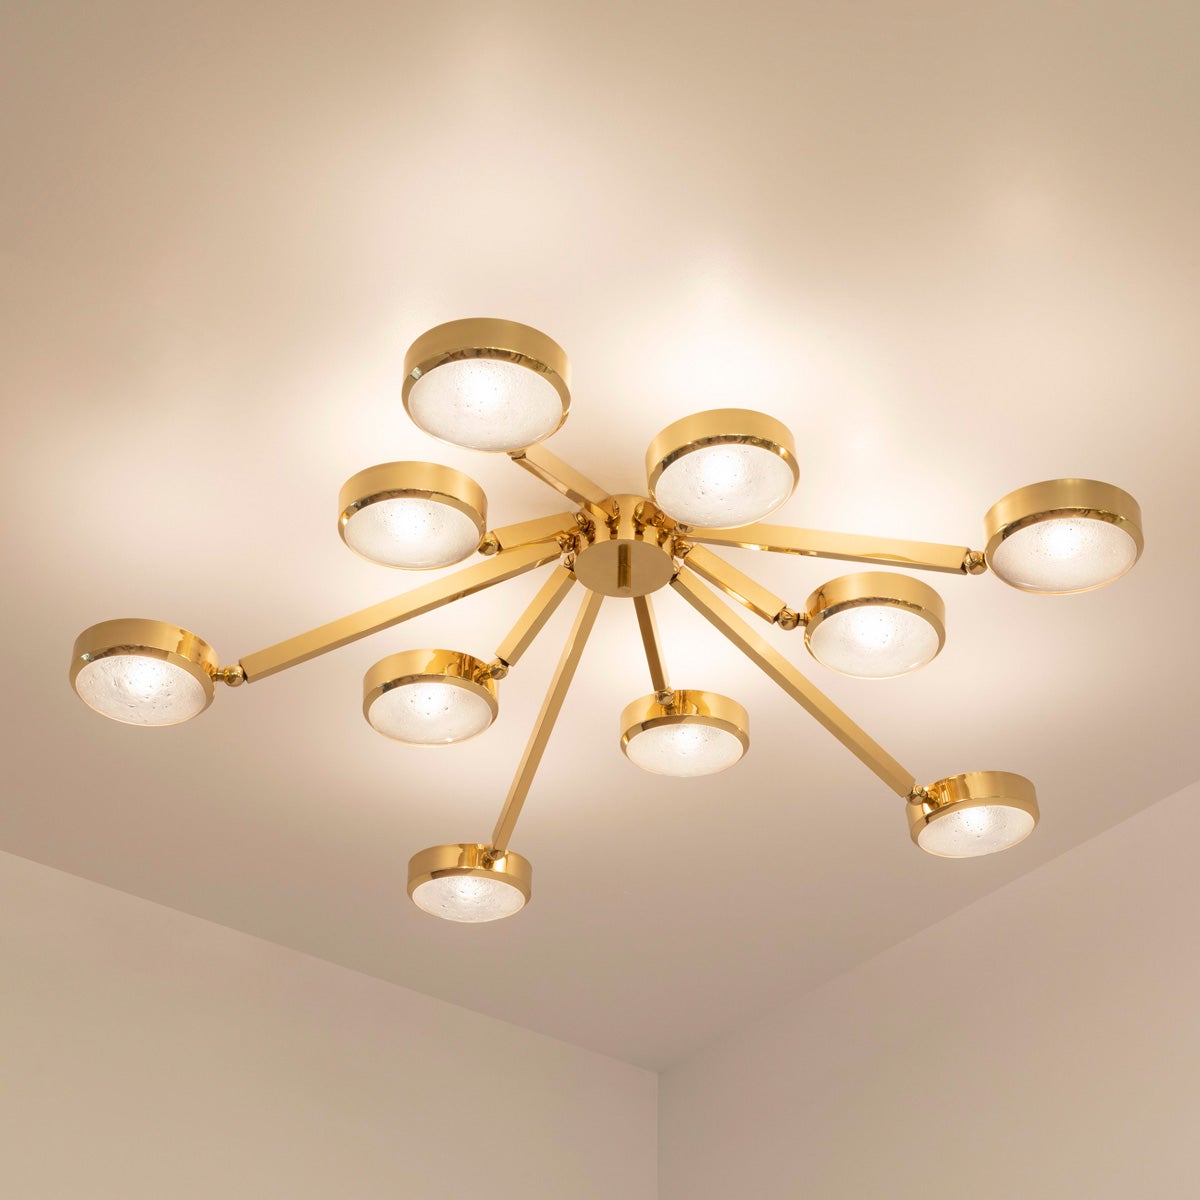 Oculus Ceiling Light by Gaspare Asaro-Murano Glass and Polished Nickel Finish In New Condition For Sale In New York, NY